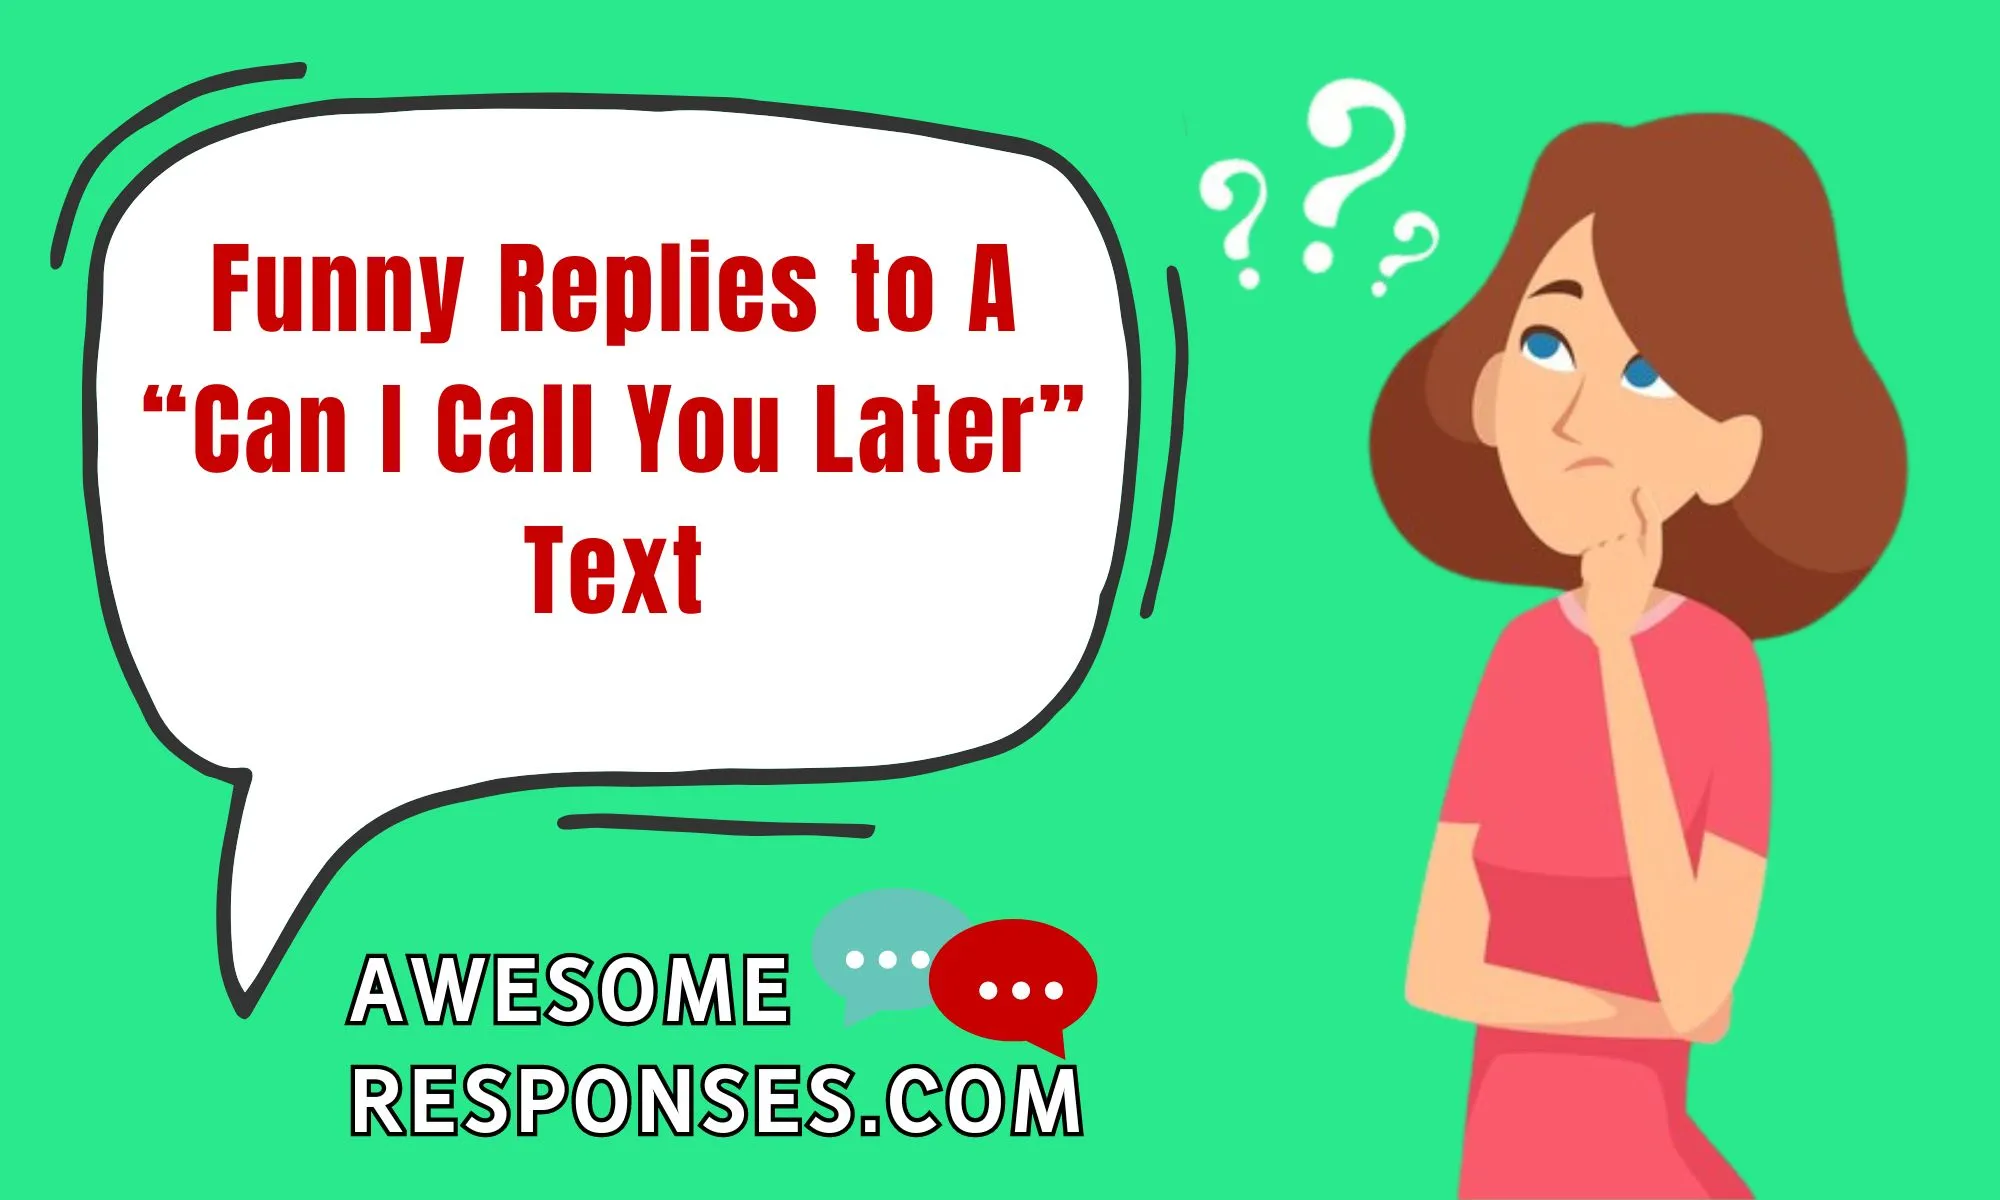 Funny Replies to A “Can I Call You Later” Text